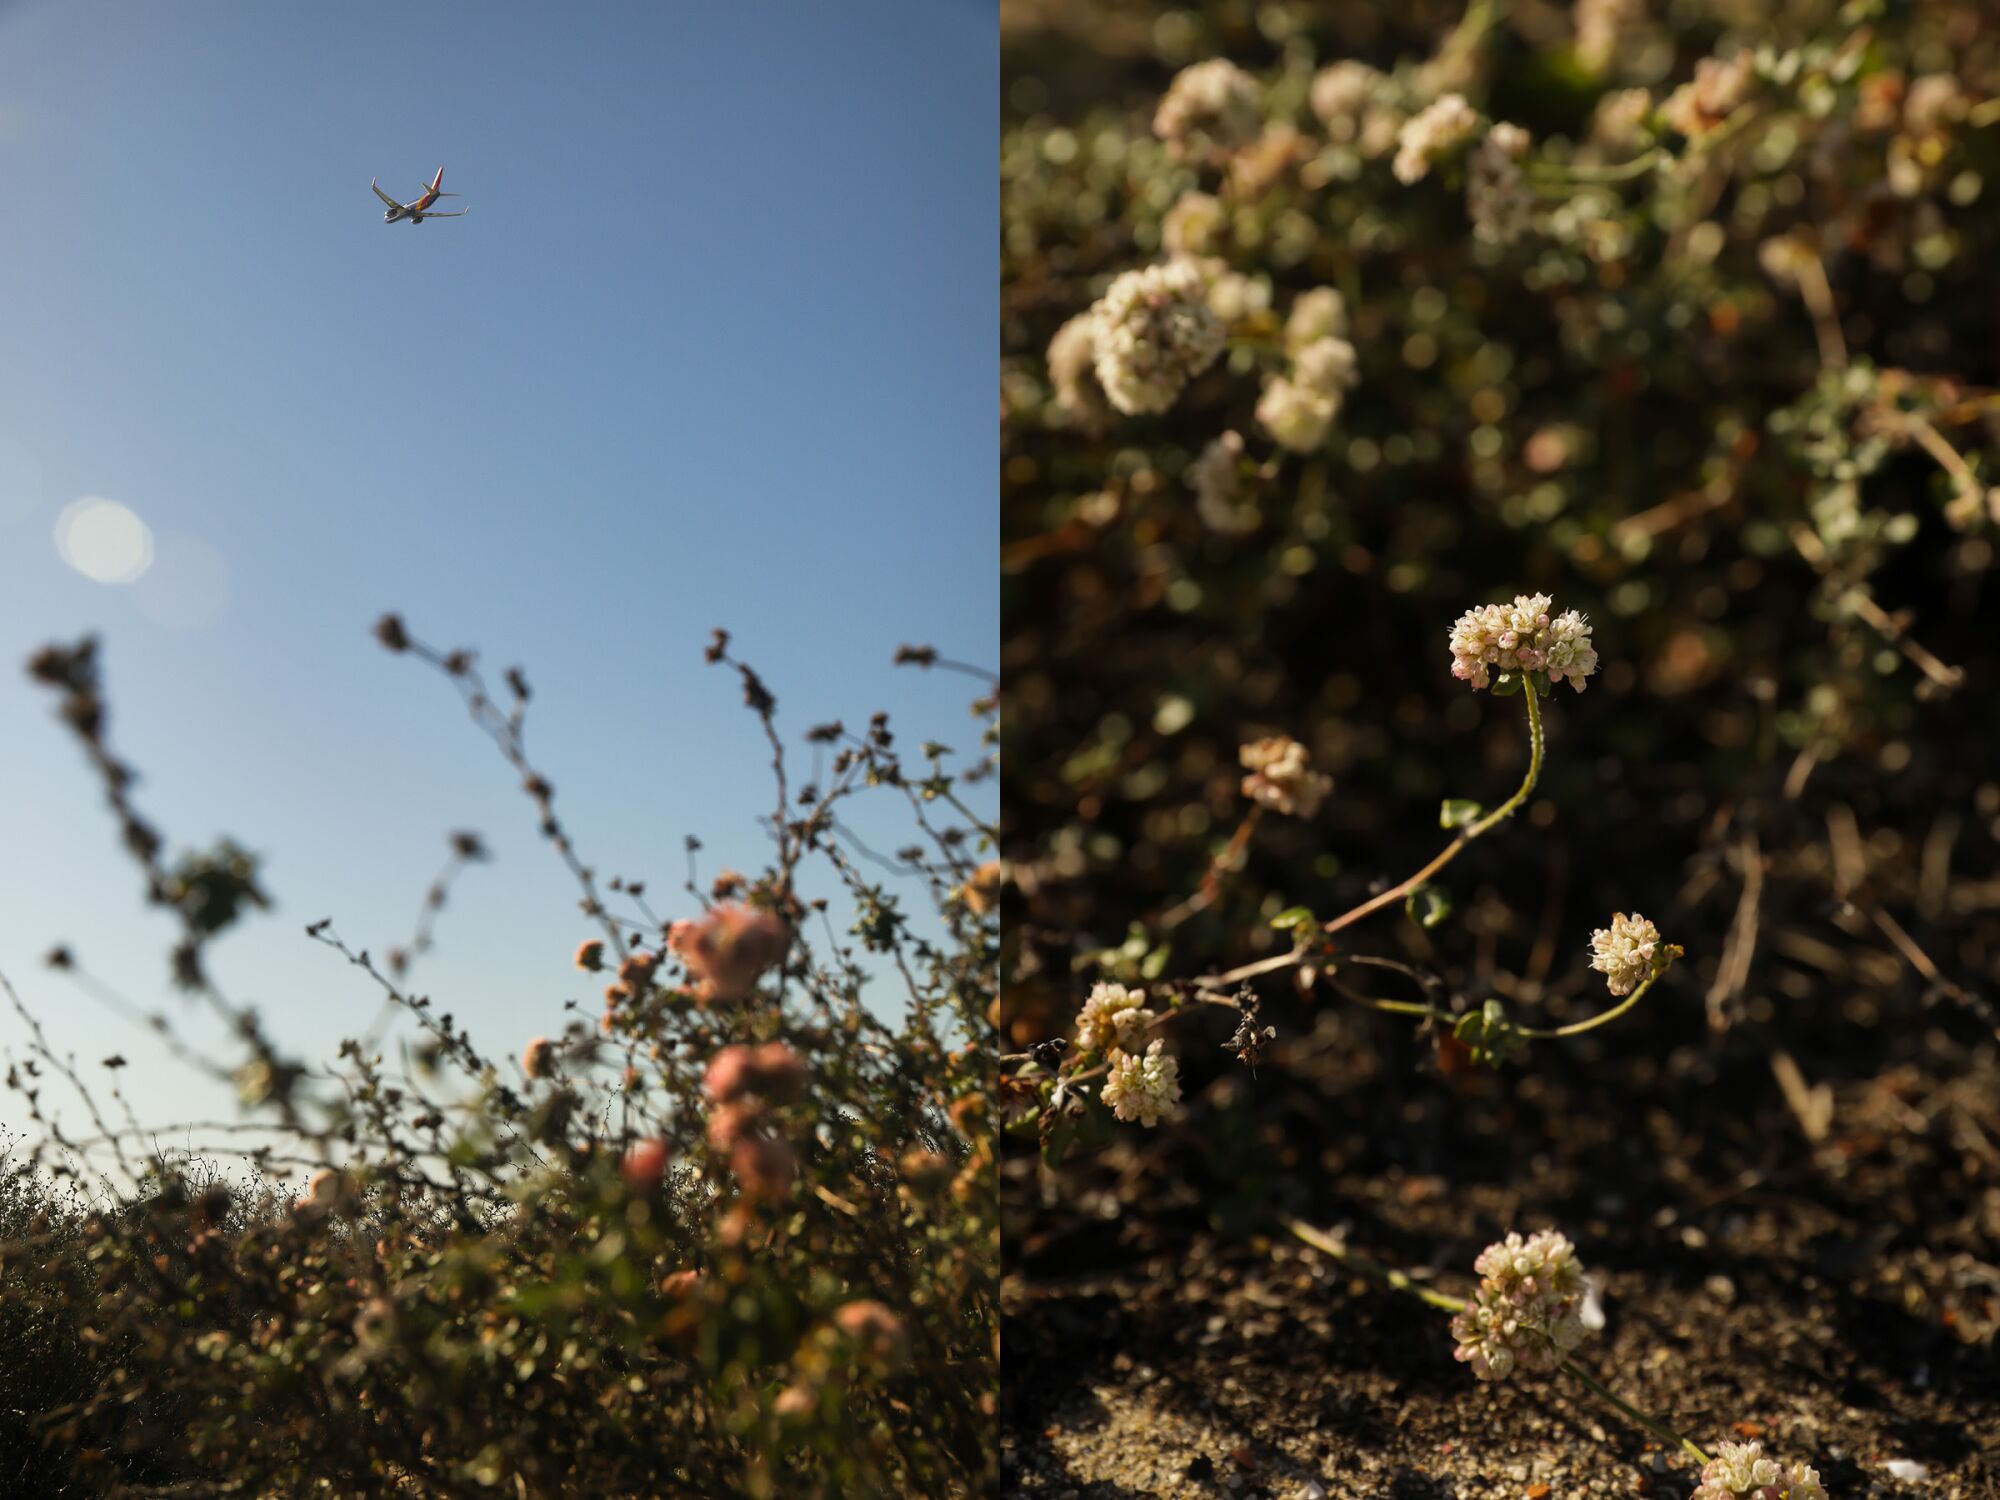 Two photos side by side, one of an airplane high in the sky over some bushes, the other of flowers on bushes.